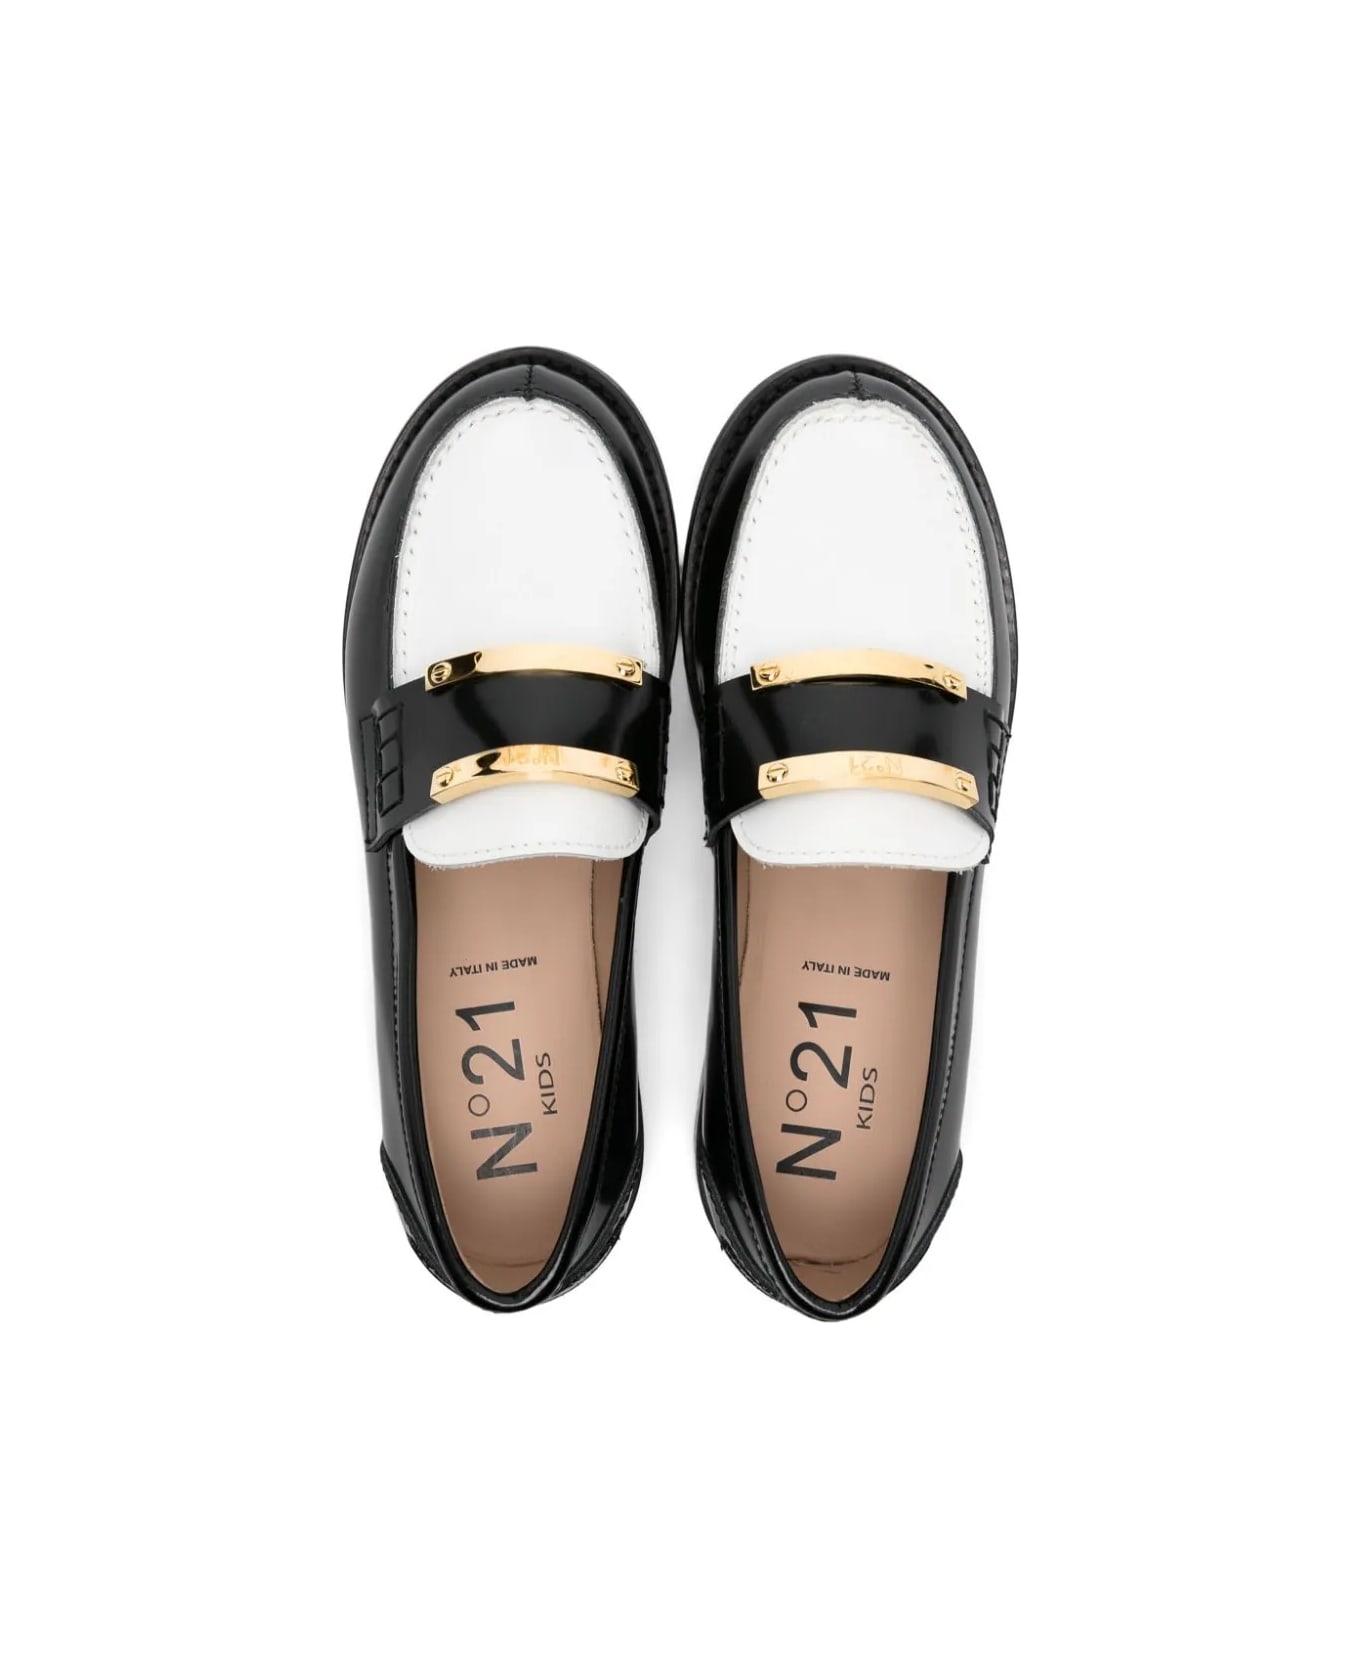 N.21 Loafers With Color-block Design - Black シューズ